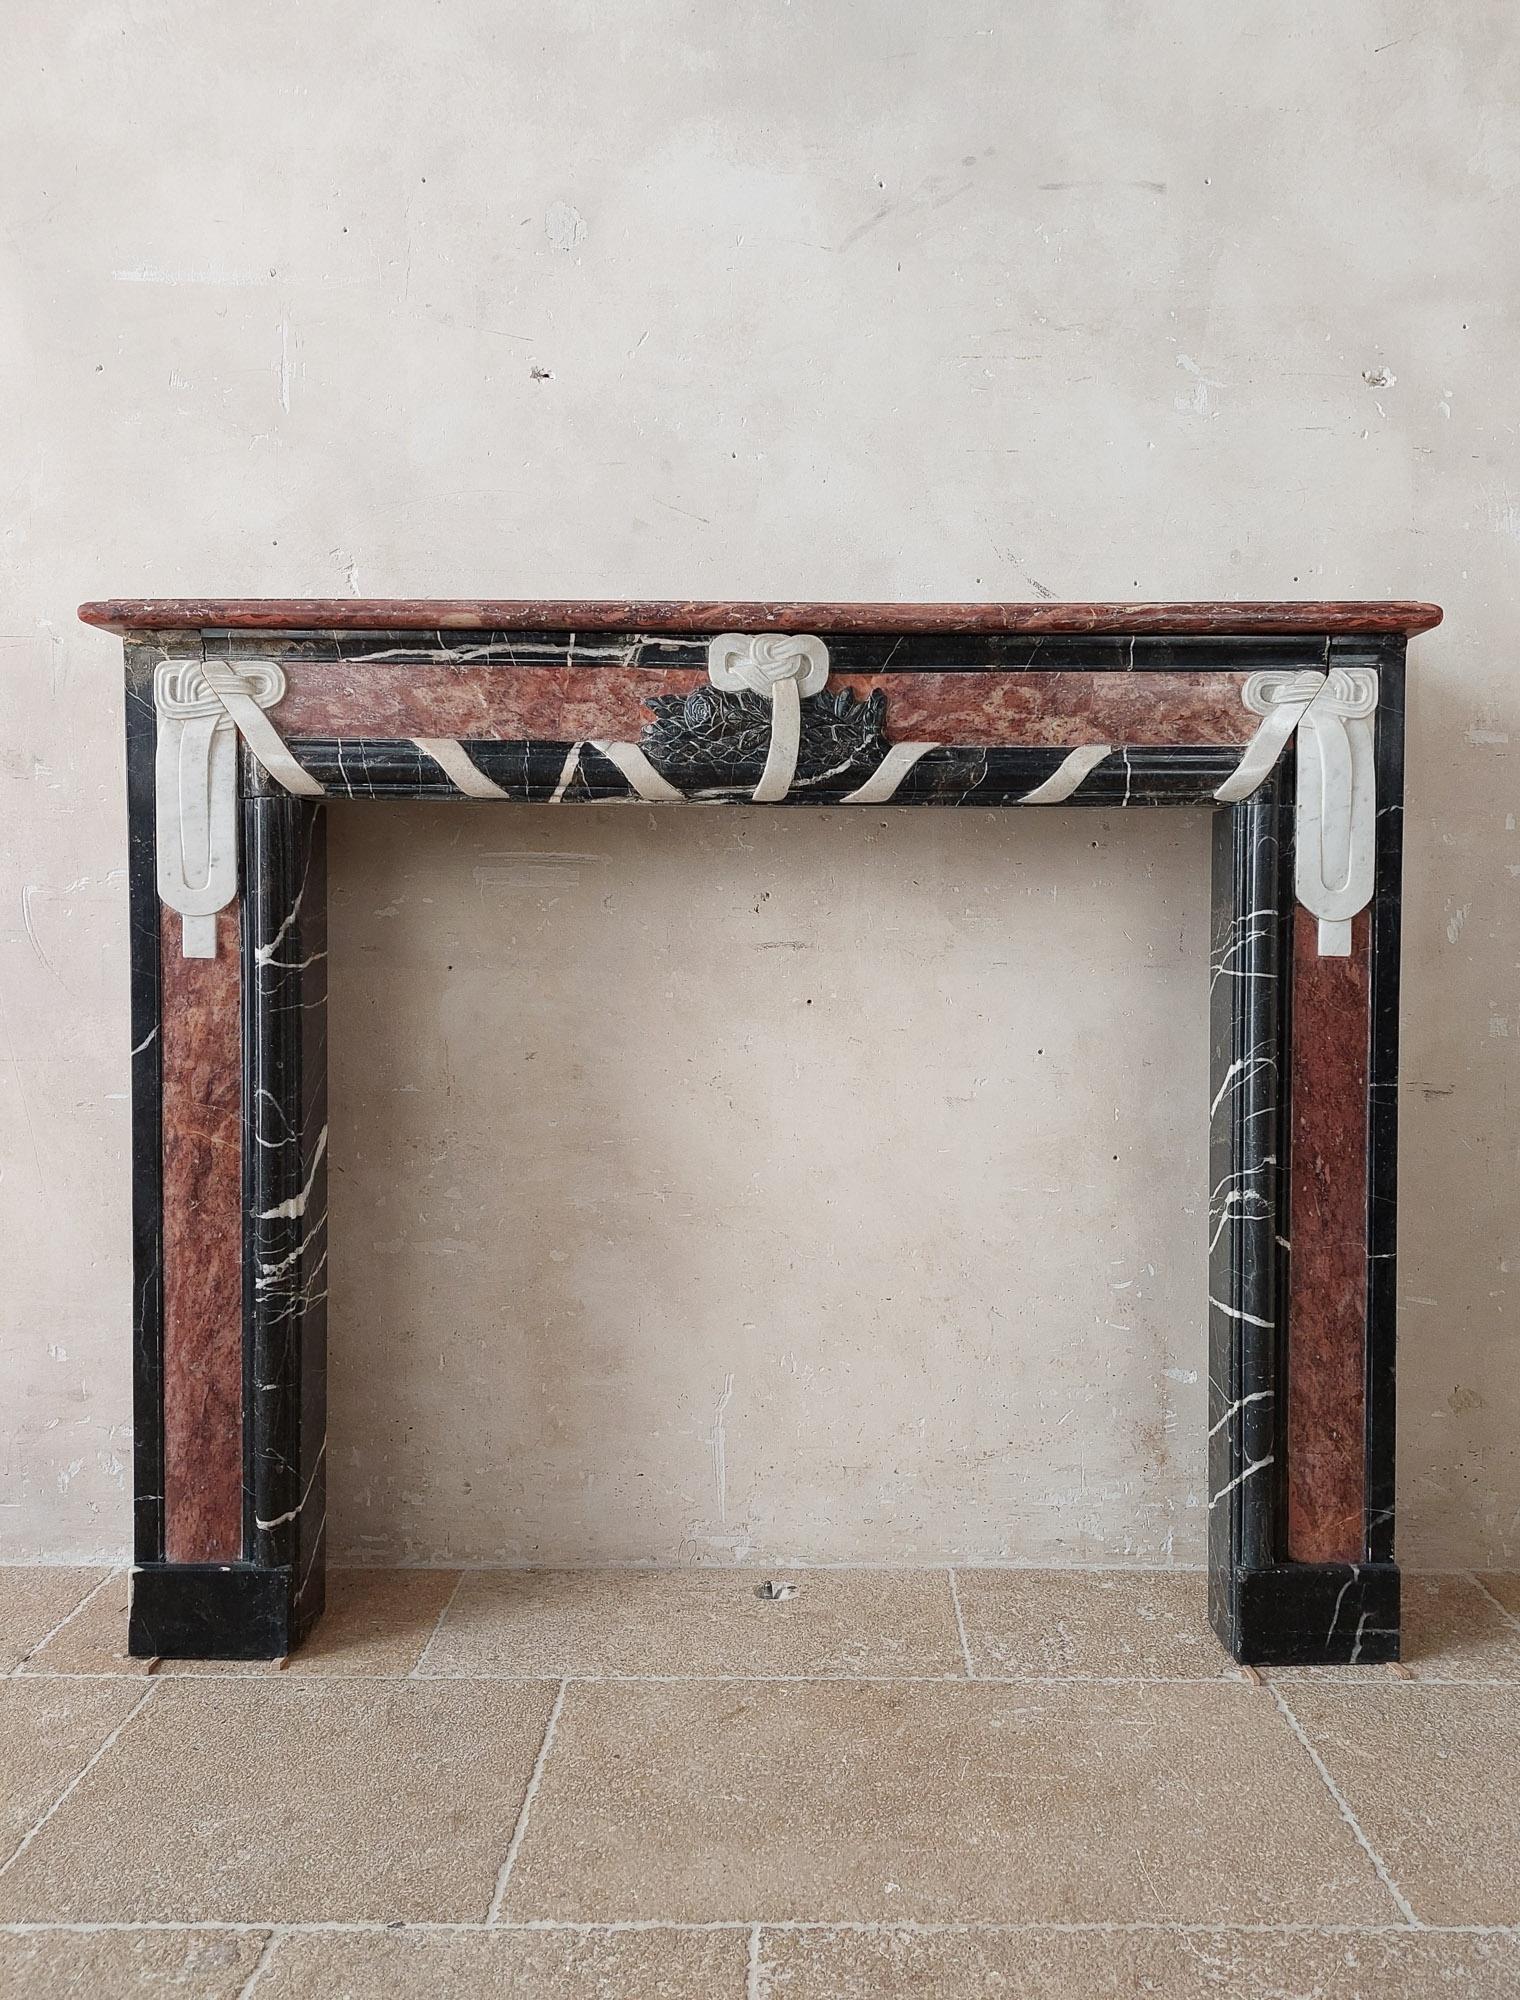 Special three-color marble Art Deco fireplace. From the transistion period, in the early 20th century, with influence of both Art Nouveau and Art Deco, with A-symmetrical floral decoration in the center and ribbon-shaped decorations in clean lines.